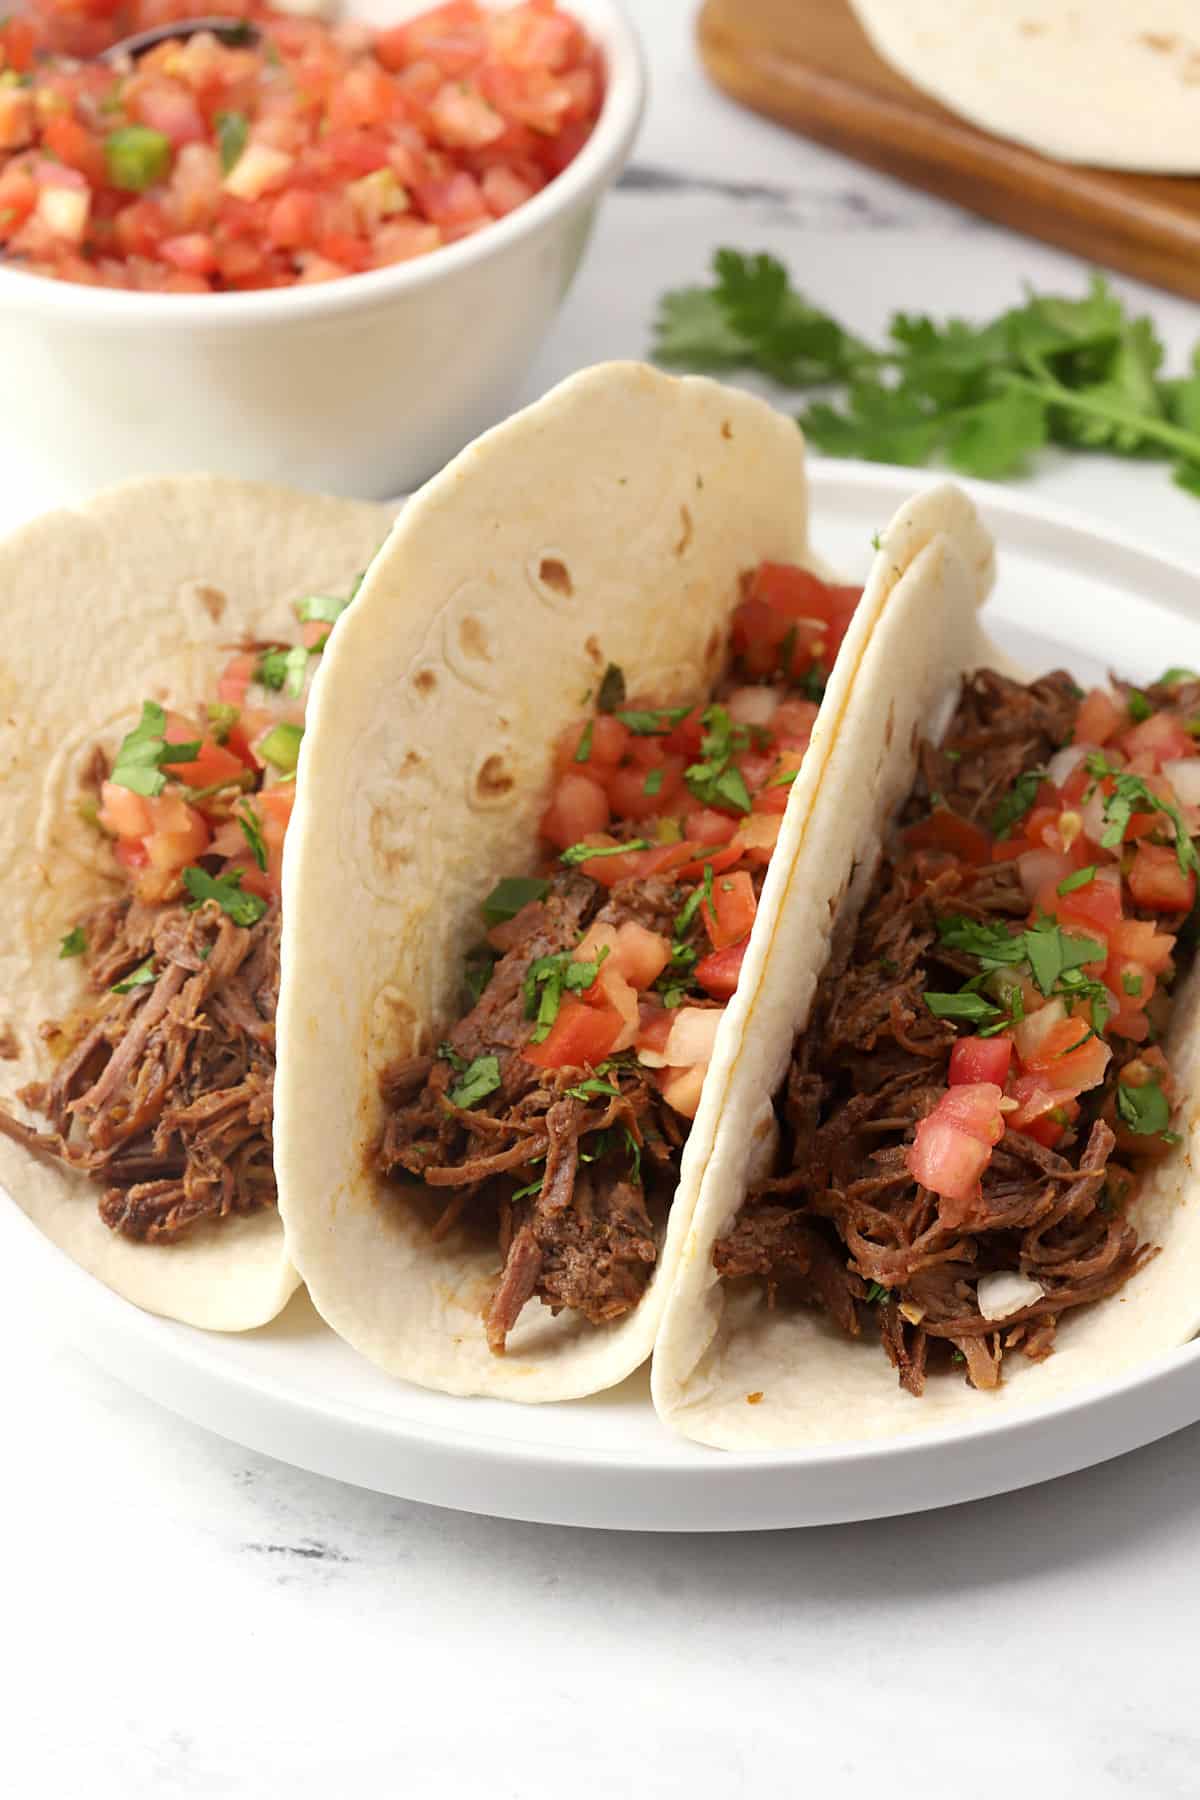 Three tacos made with flour tortillas filled with shredded beef and pico de gallo.